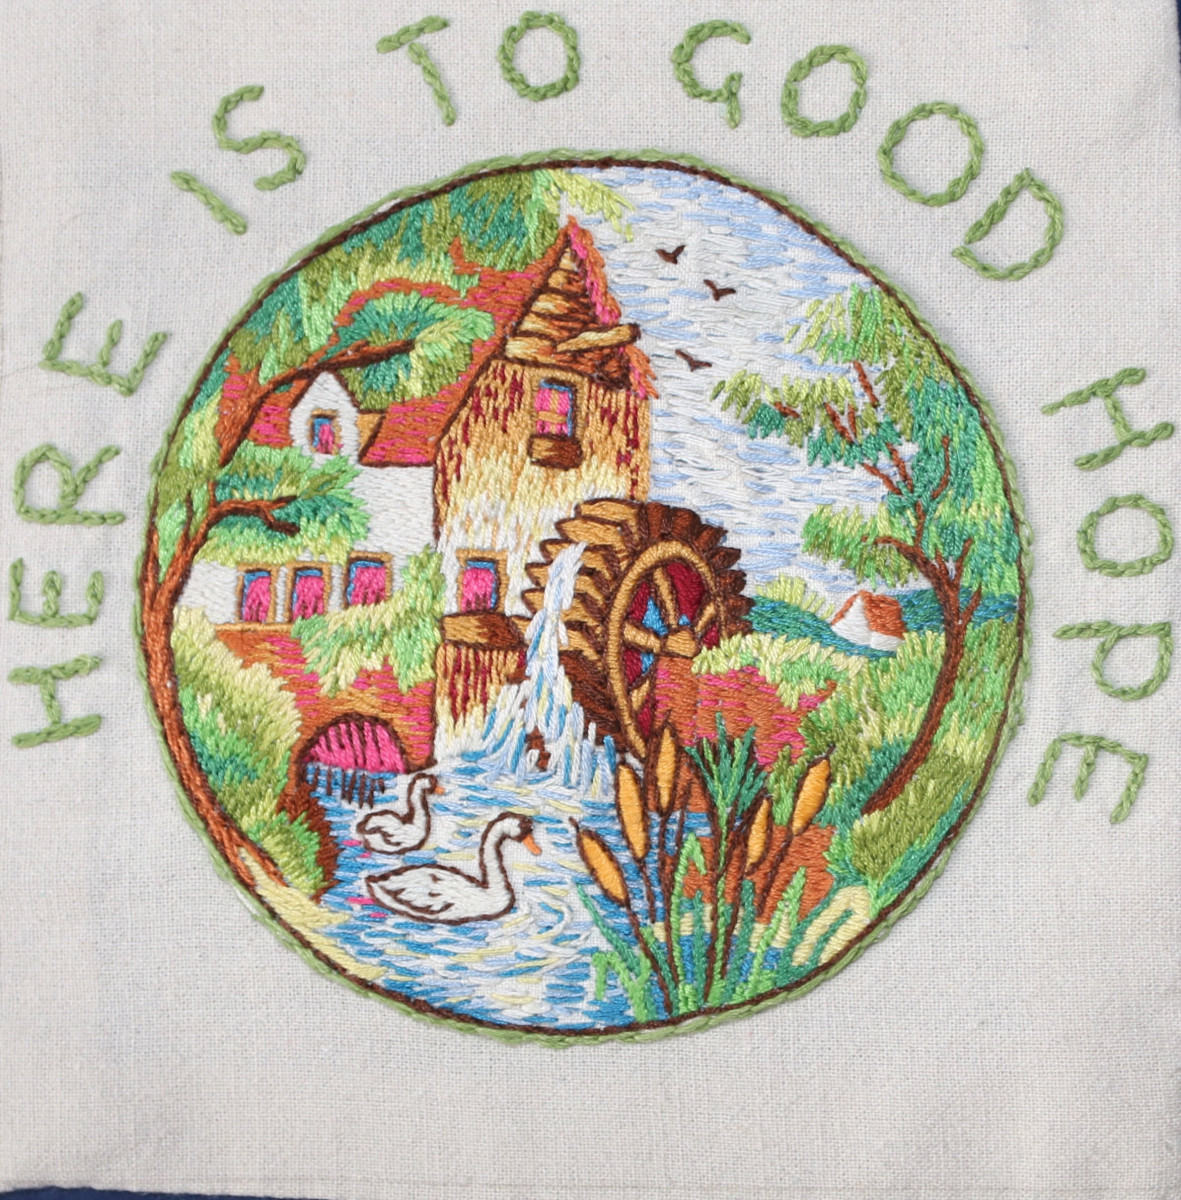 Embroidered picture of a water mill and swans. Words Here is to Good Hope embroidered above